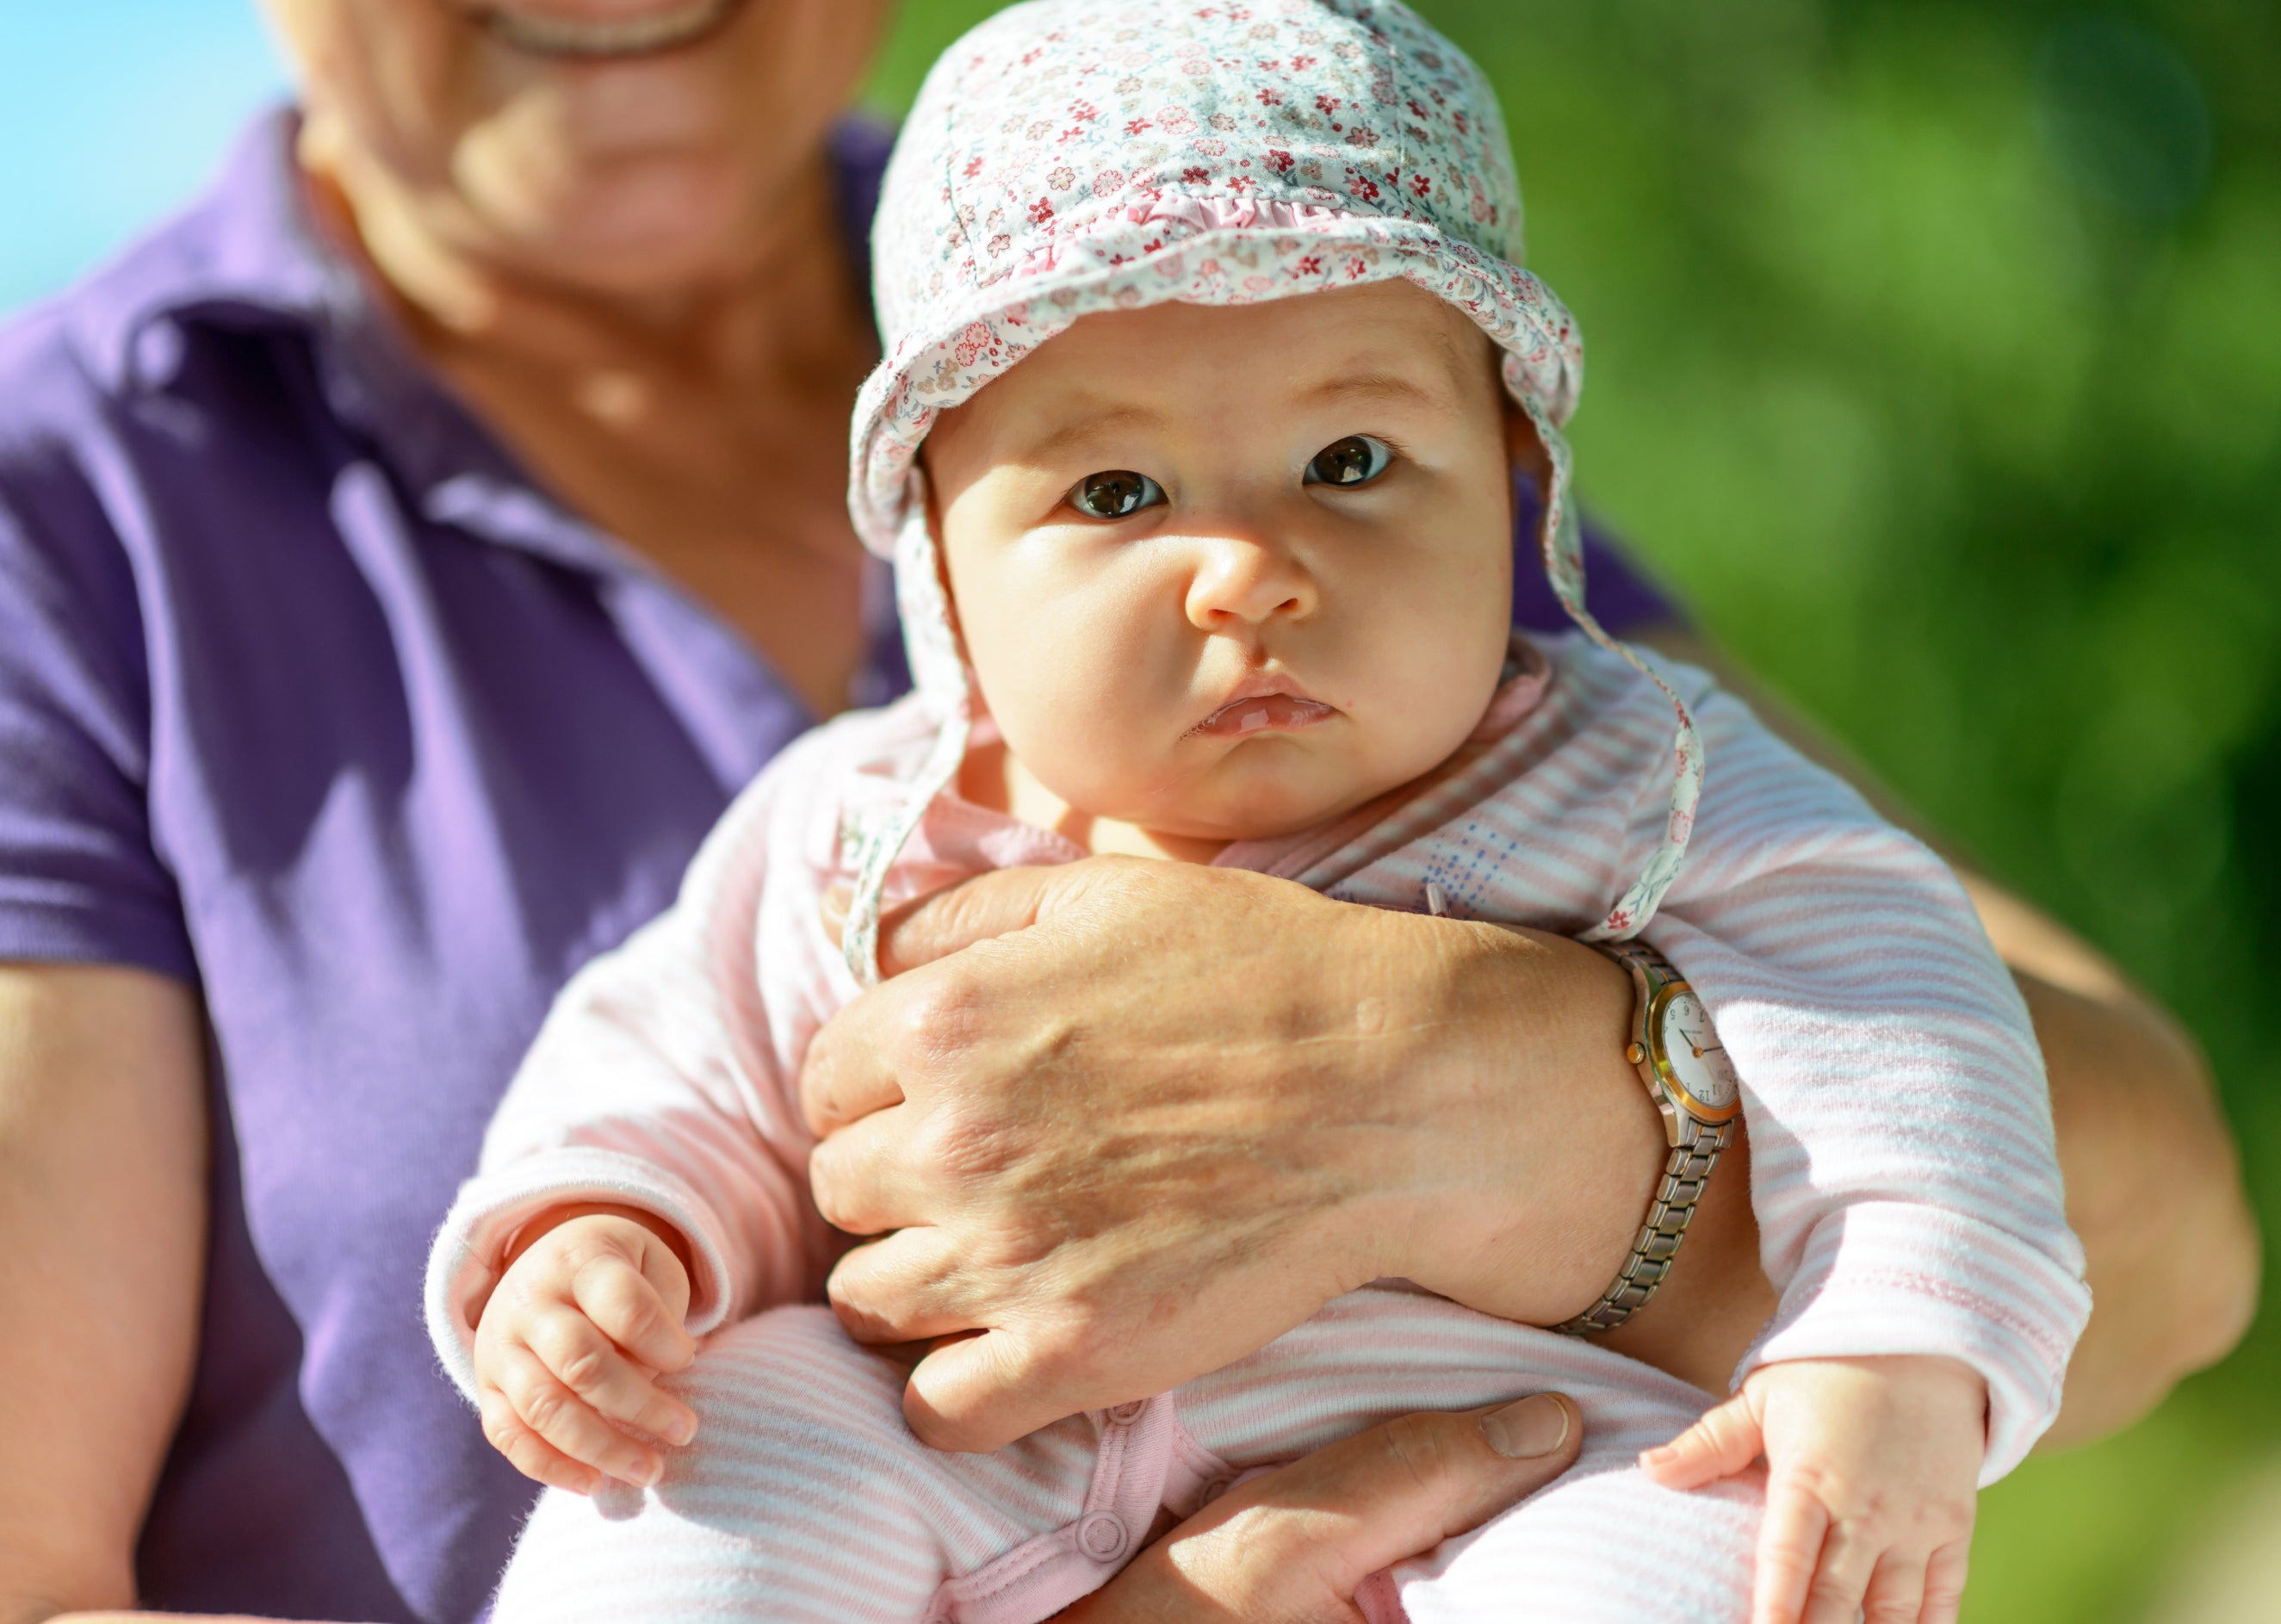 A grandmother holds her baby in the sun outside. The baby is fully covered by cotton clothes and a hat so as to be protected from the sun's rays